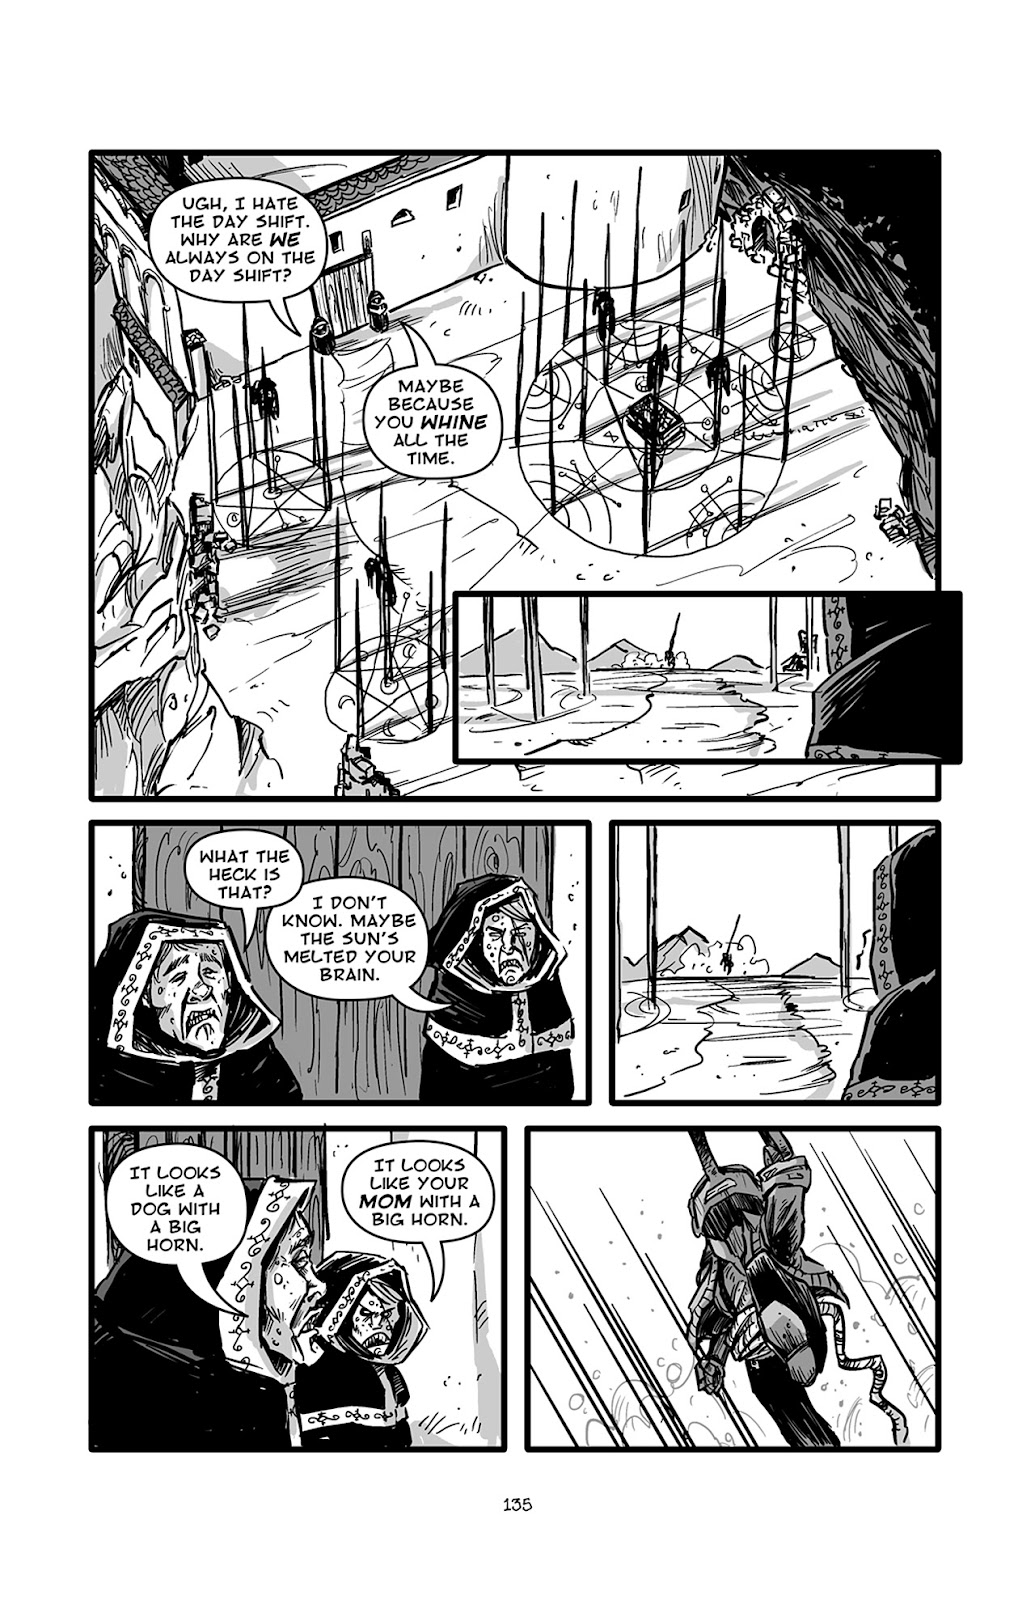 Pinocchio: Vampire Slayer - Of Wood and Blood issue 6 - Page 12